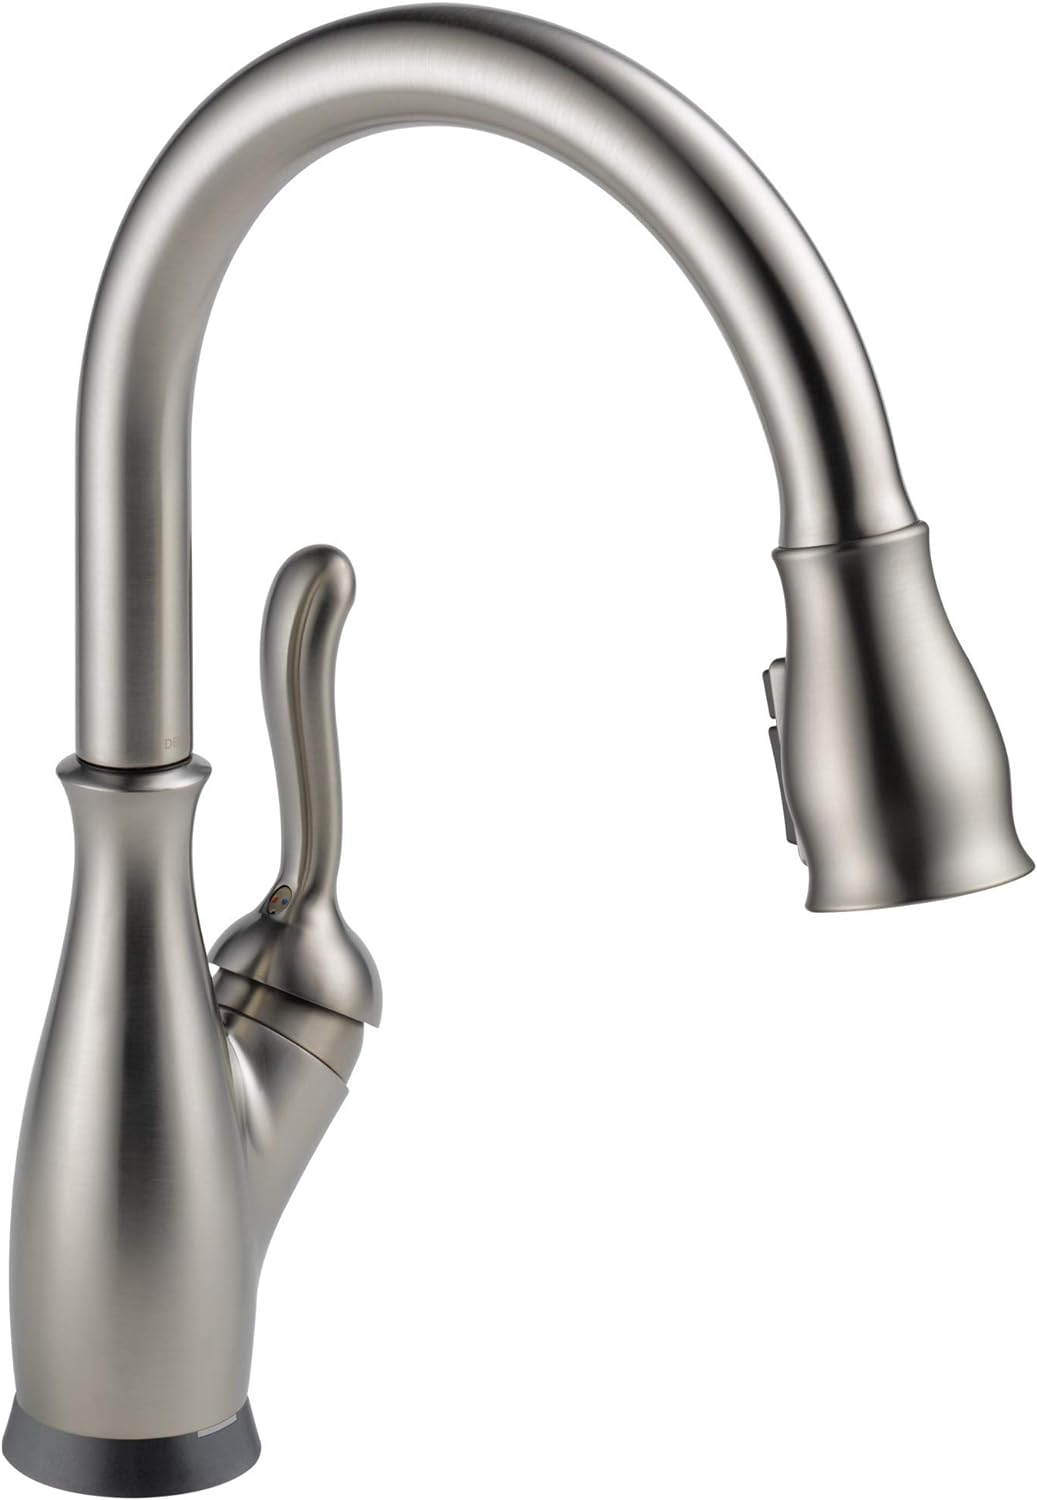 Delta Faucet Leland Touch Kitchen Faucet Brushed Nickel, Kitchen Faucets with Pull Down Sprayer, Kitchen Sink Faucet, Touch2O Technology, SpotShield Stainless 9178T-SP-DST, Without Soap Dispenser